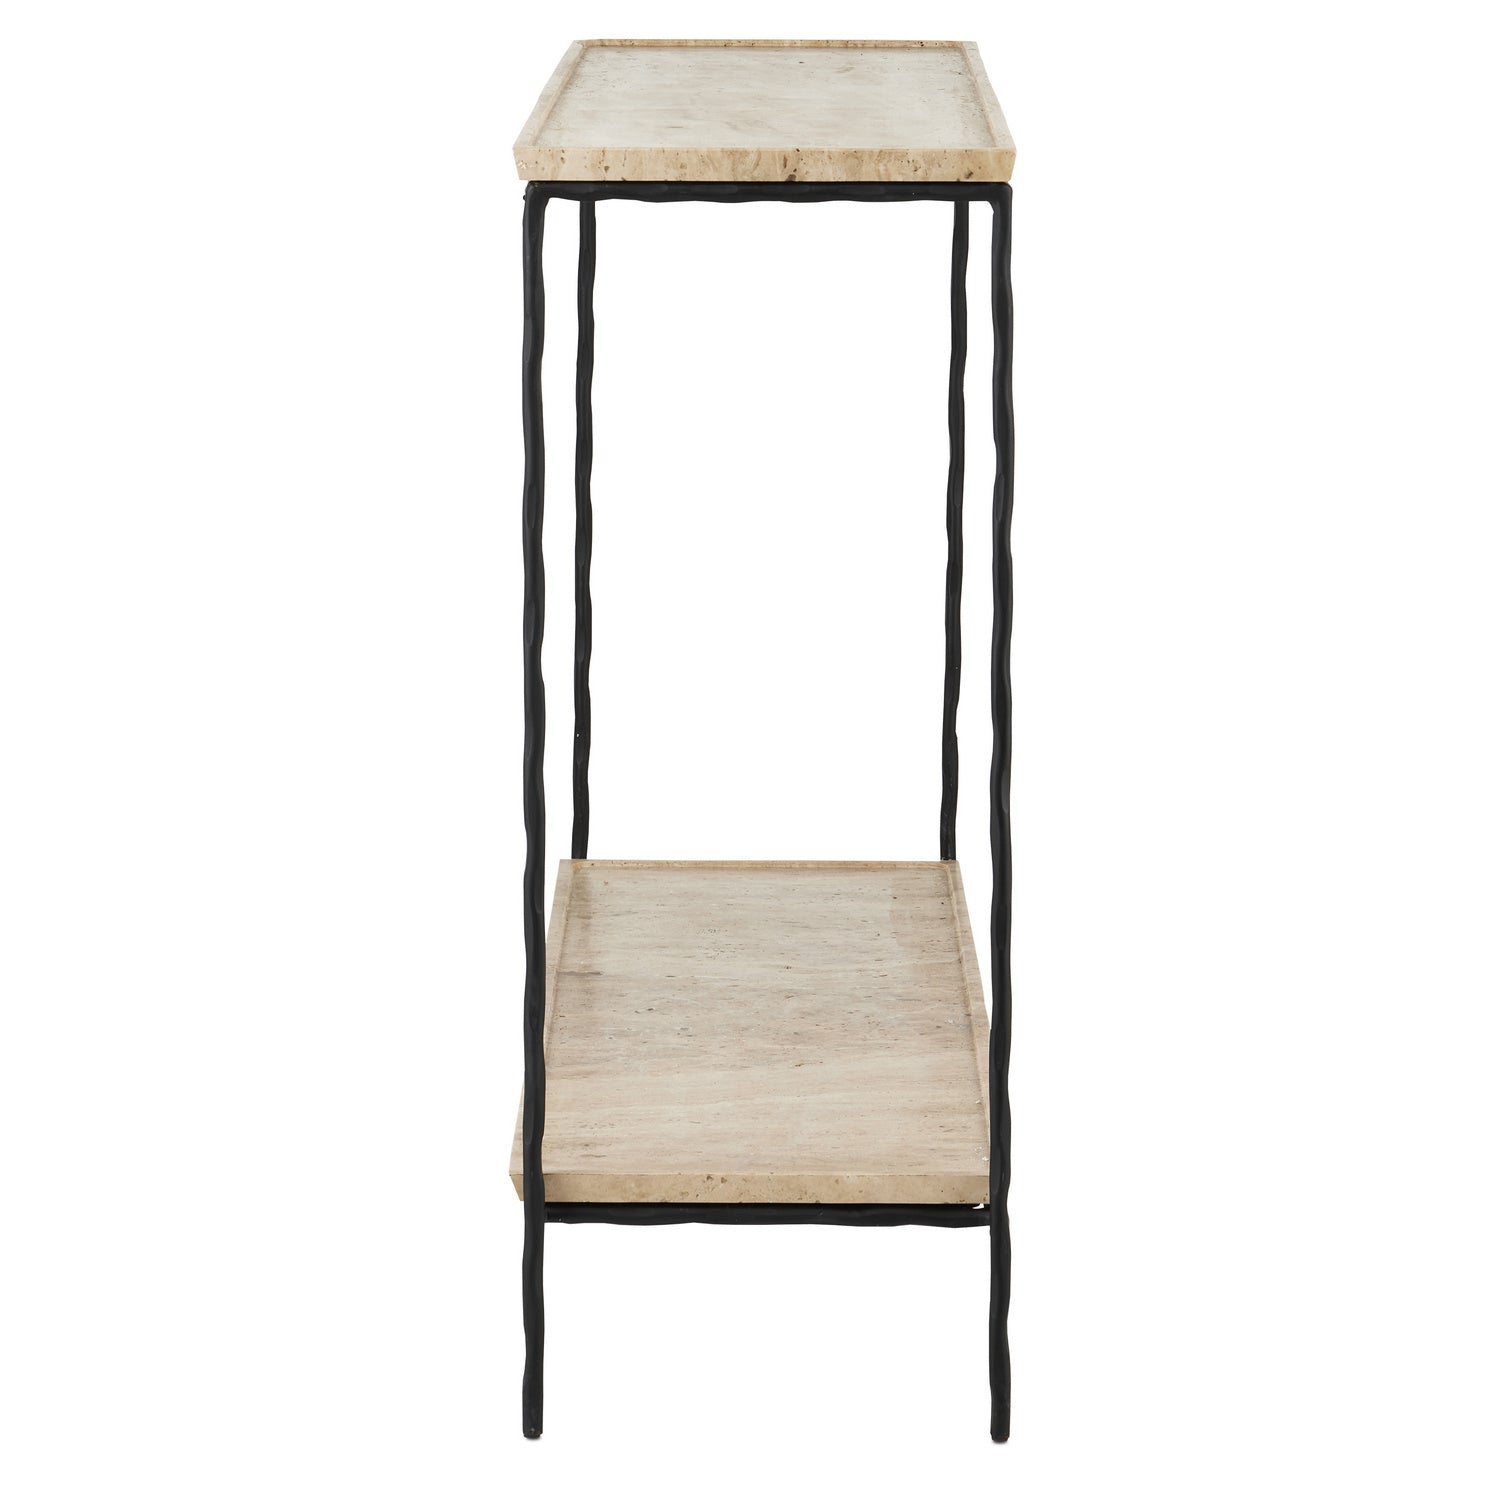 Console Table from the Boyles collection in Natural/Black finish